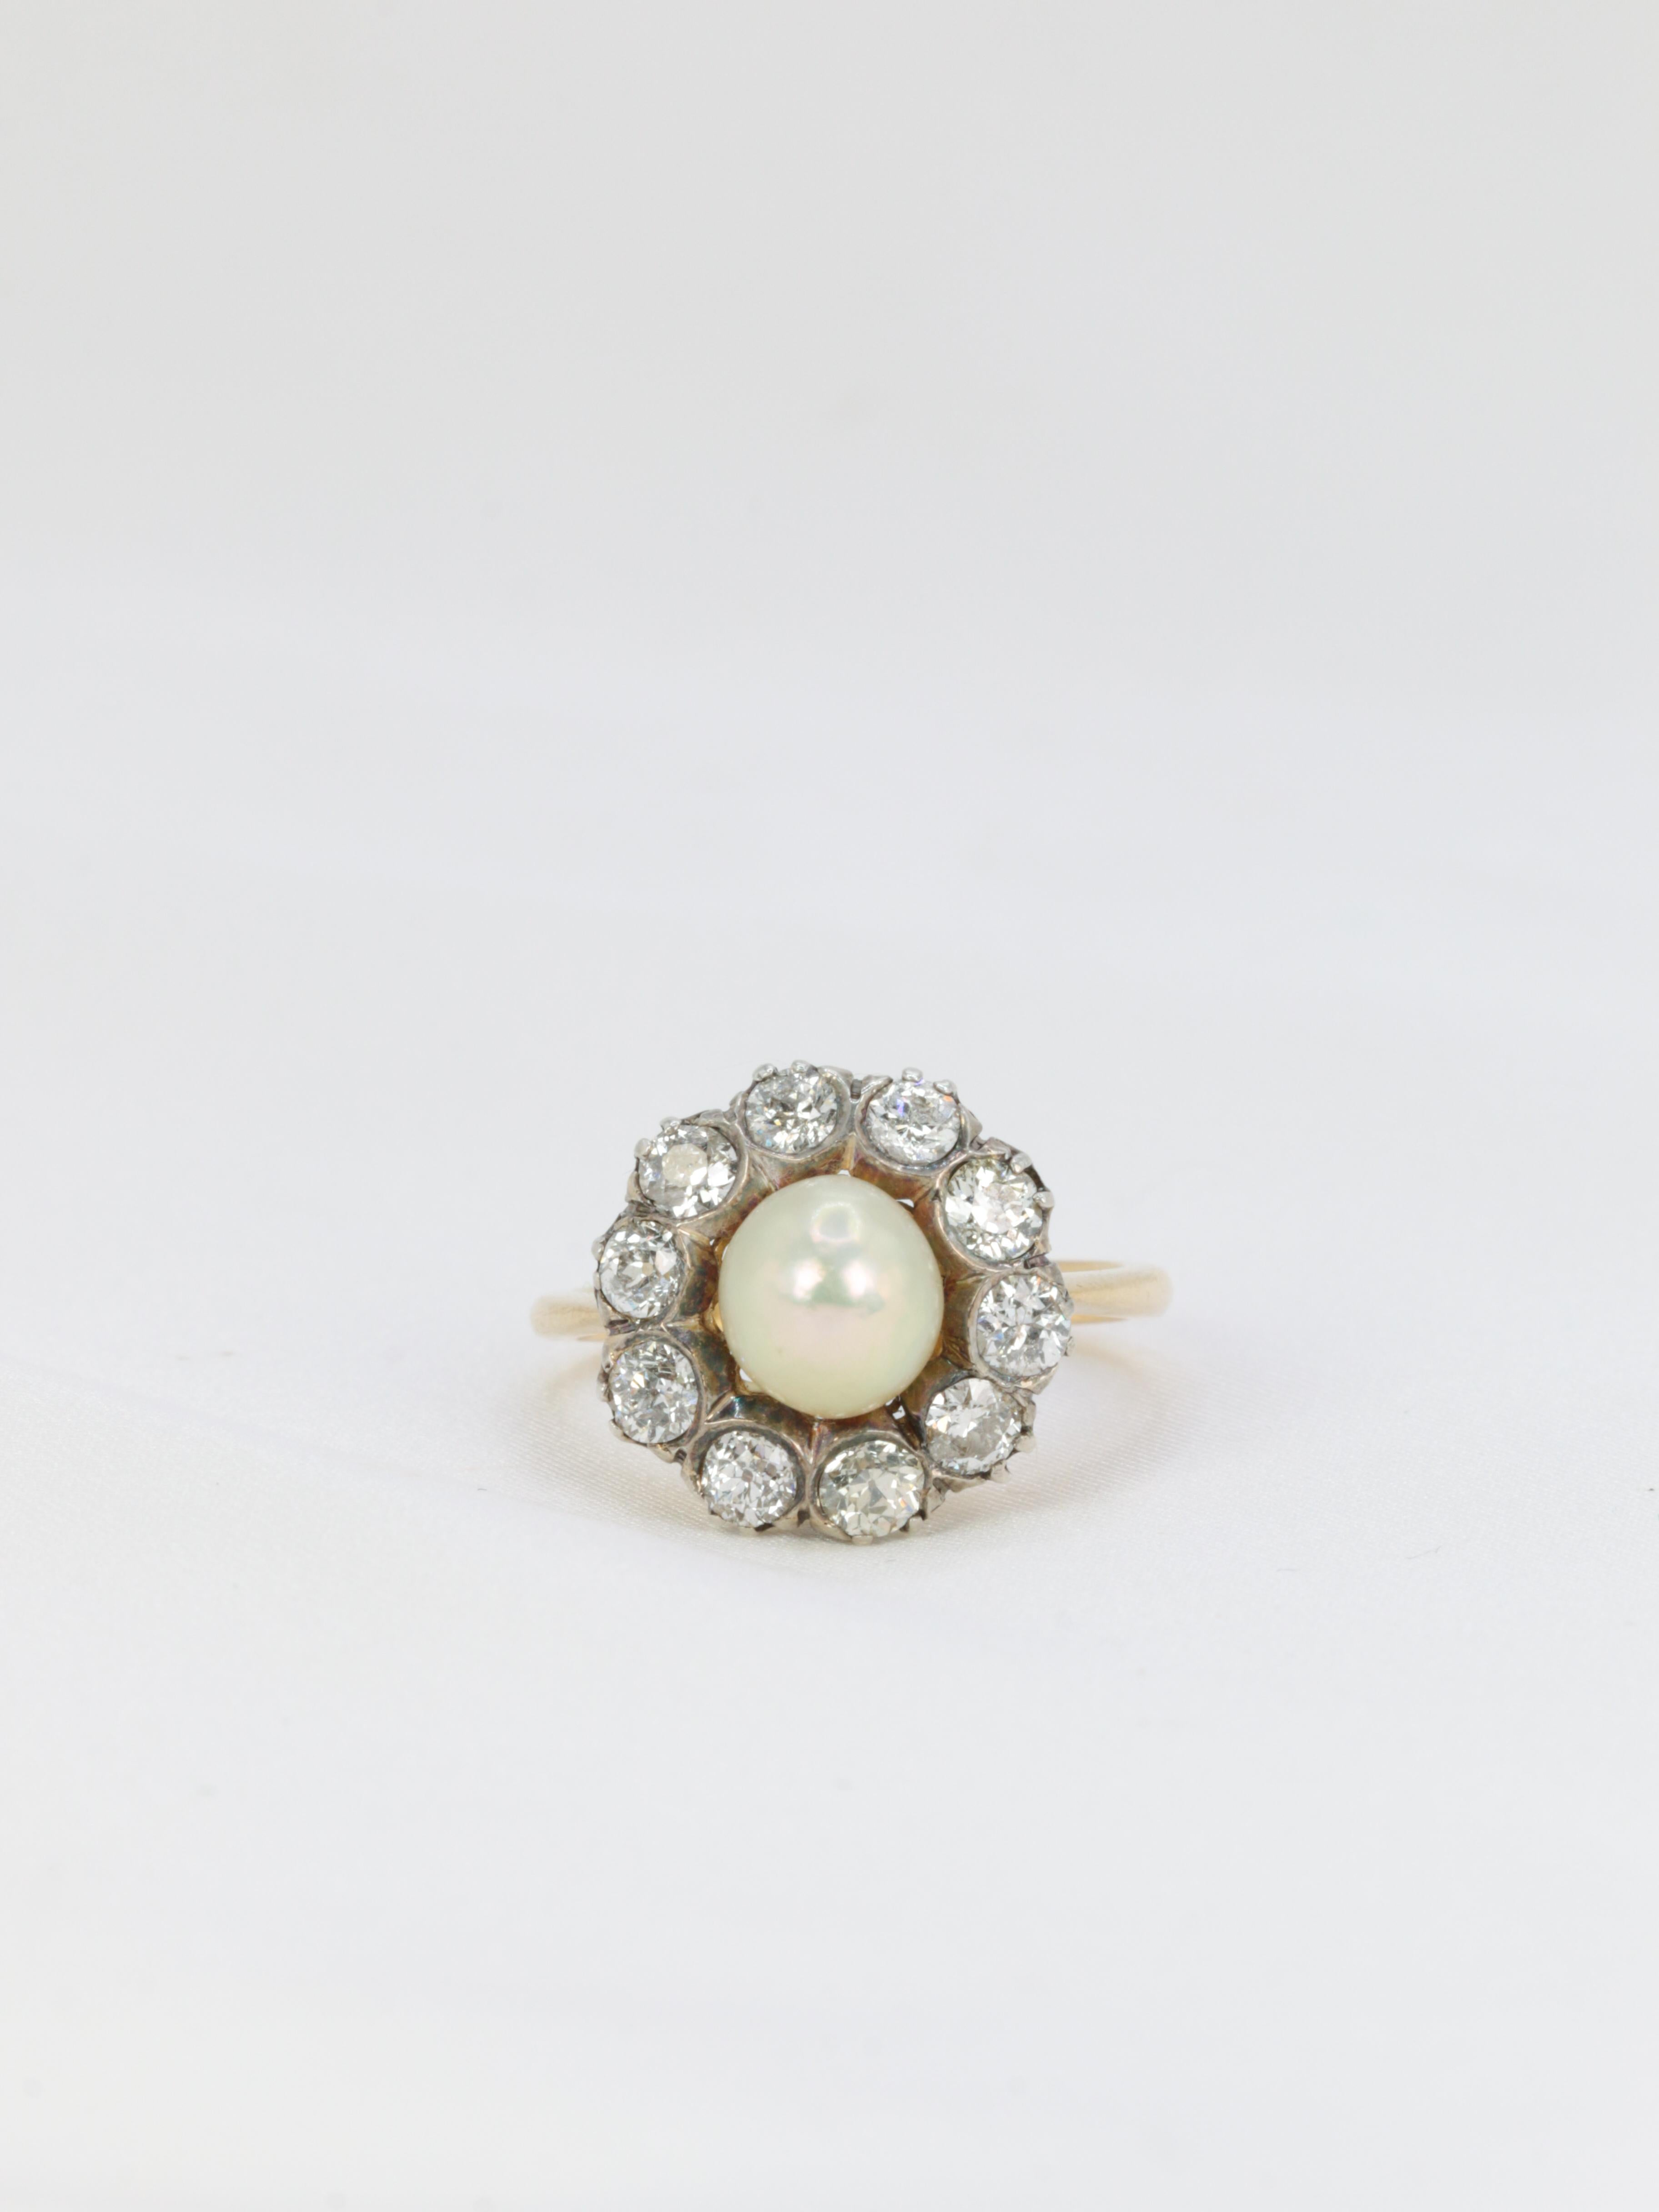 Antique cluster ring in 18Kt gold (750°/°°) and silver set in its center with a natural pearl (very slightly baroque cream-coloured) and ten fine quality old mine cut diamonds for a total weight of approximately 1.2 ct.
Edwardian work from the 19th